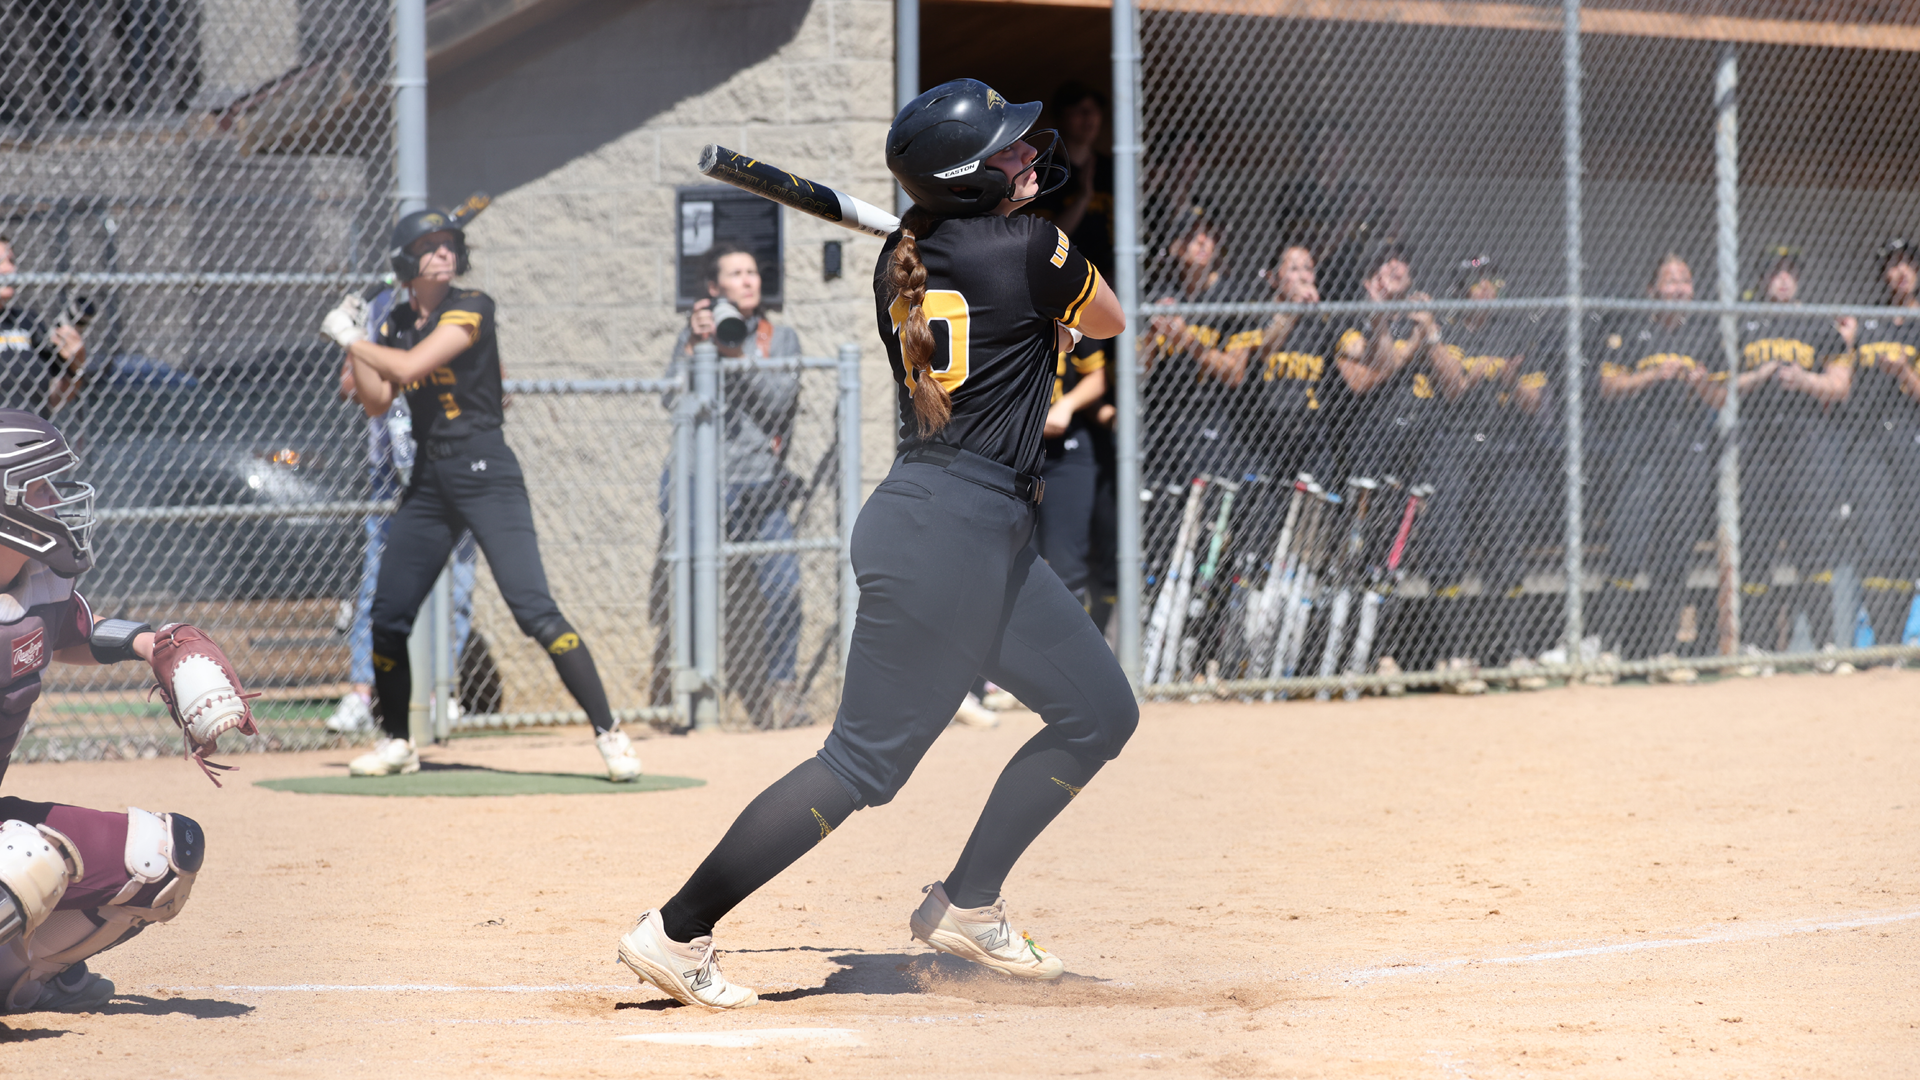 Sophie Wery hit two home runs in game two against MSOE on Tuesday. Photo Credit: Steve Frommell, UW-Oshkosh Sports Information